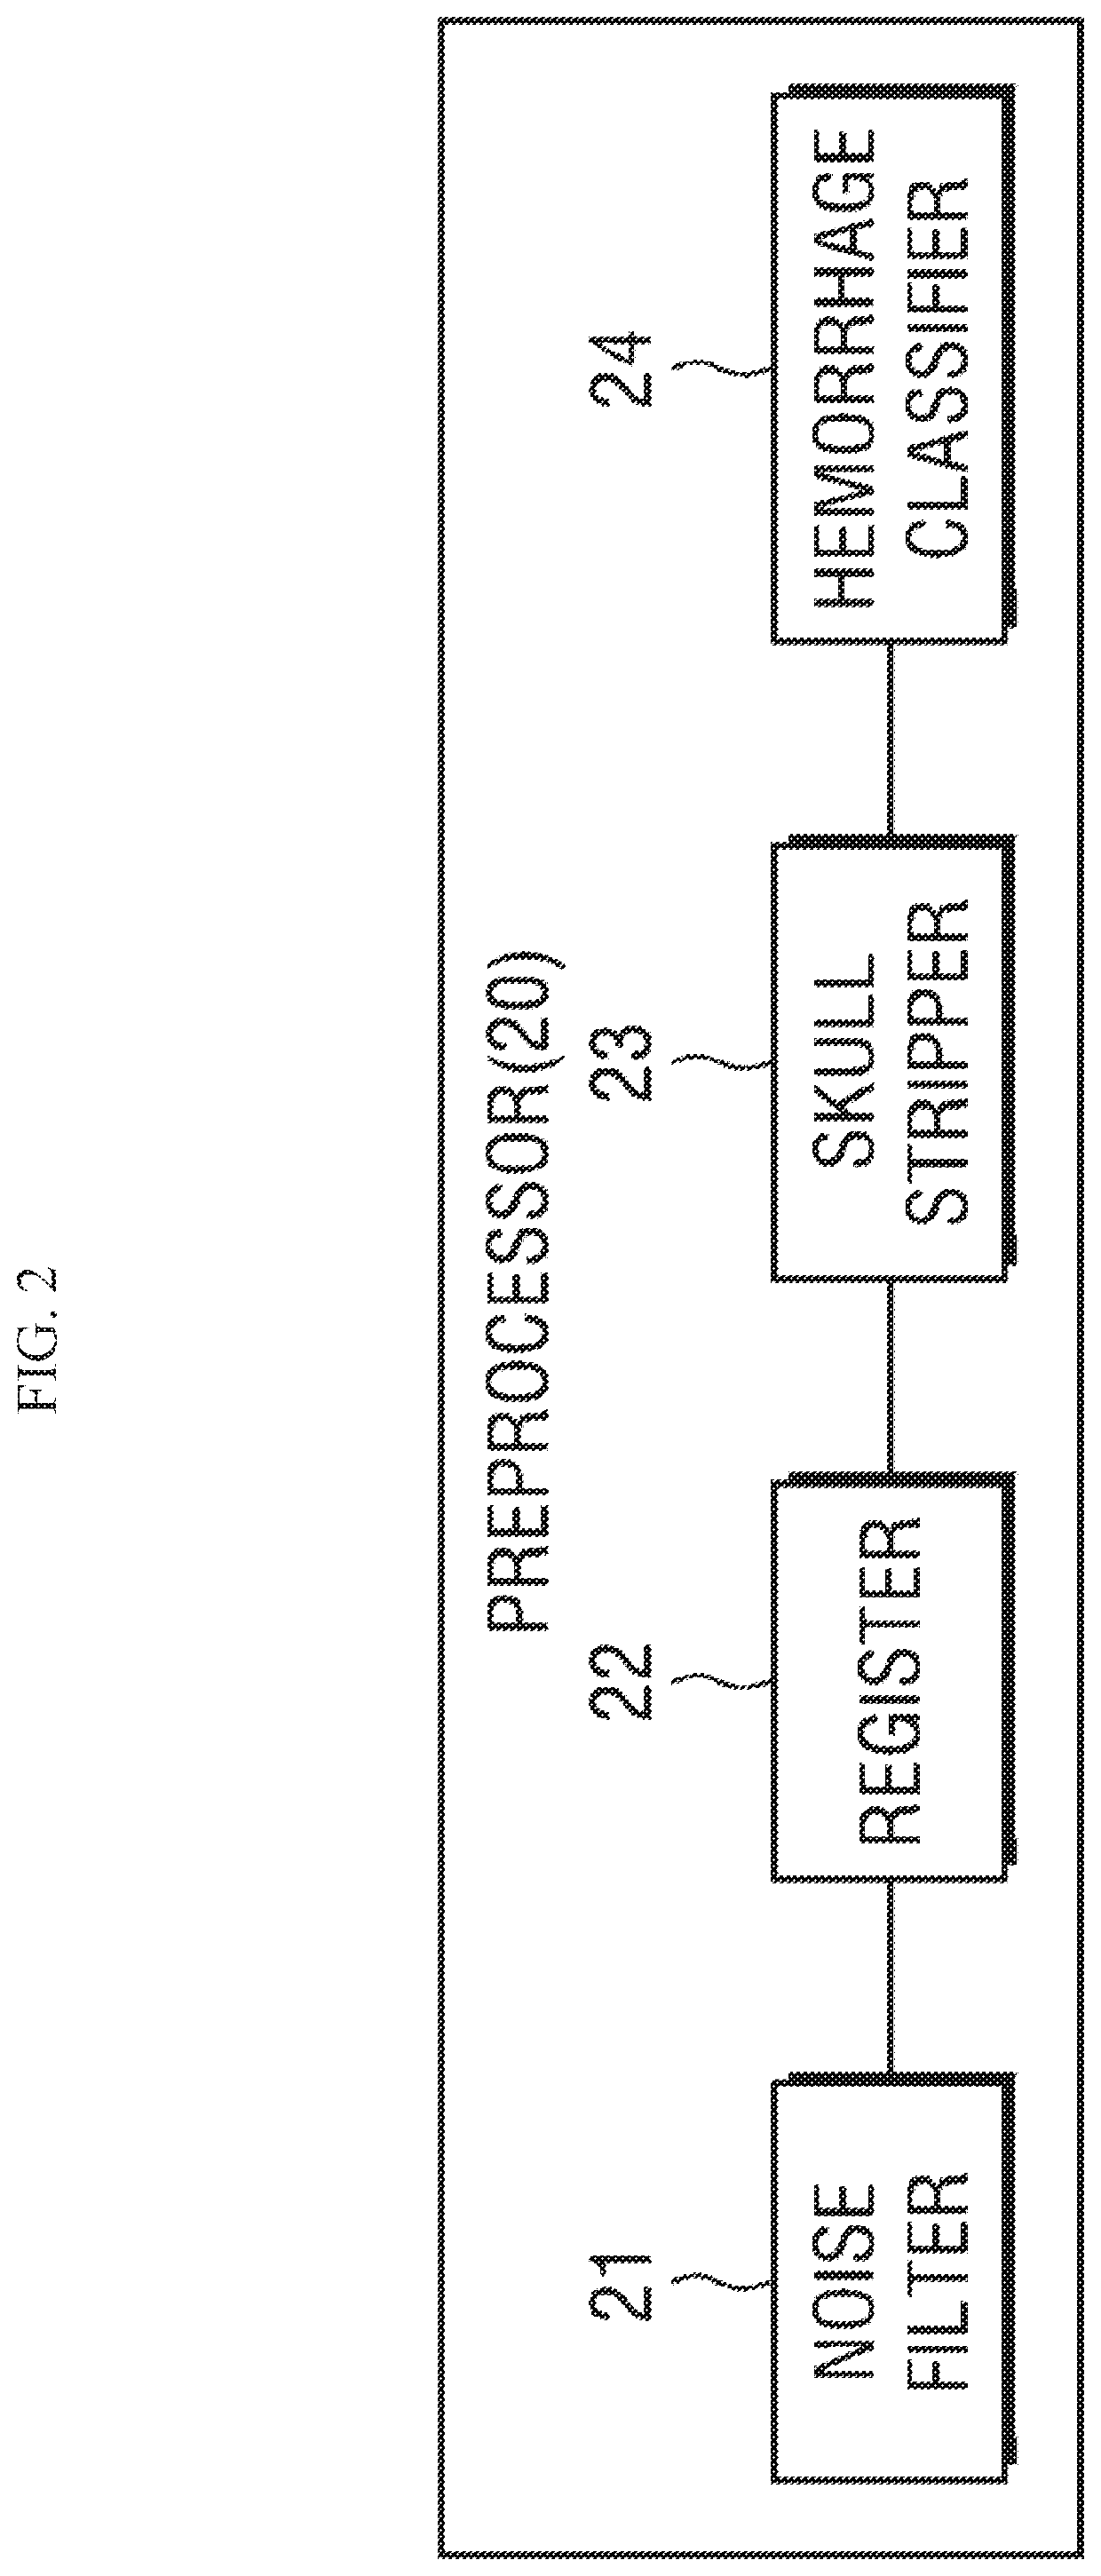 Stroke diagnosis apparatus based on artificial intelligence and method